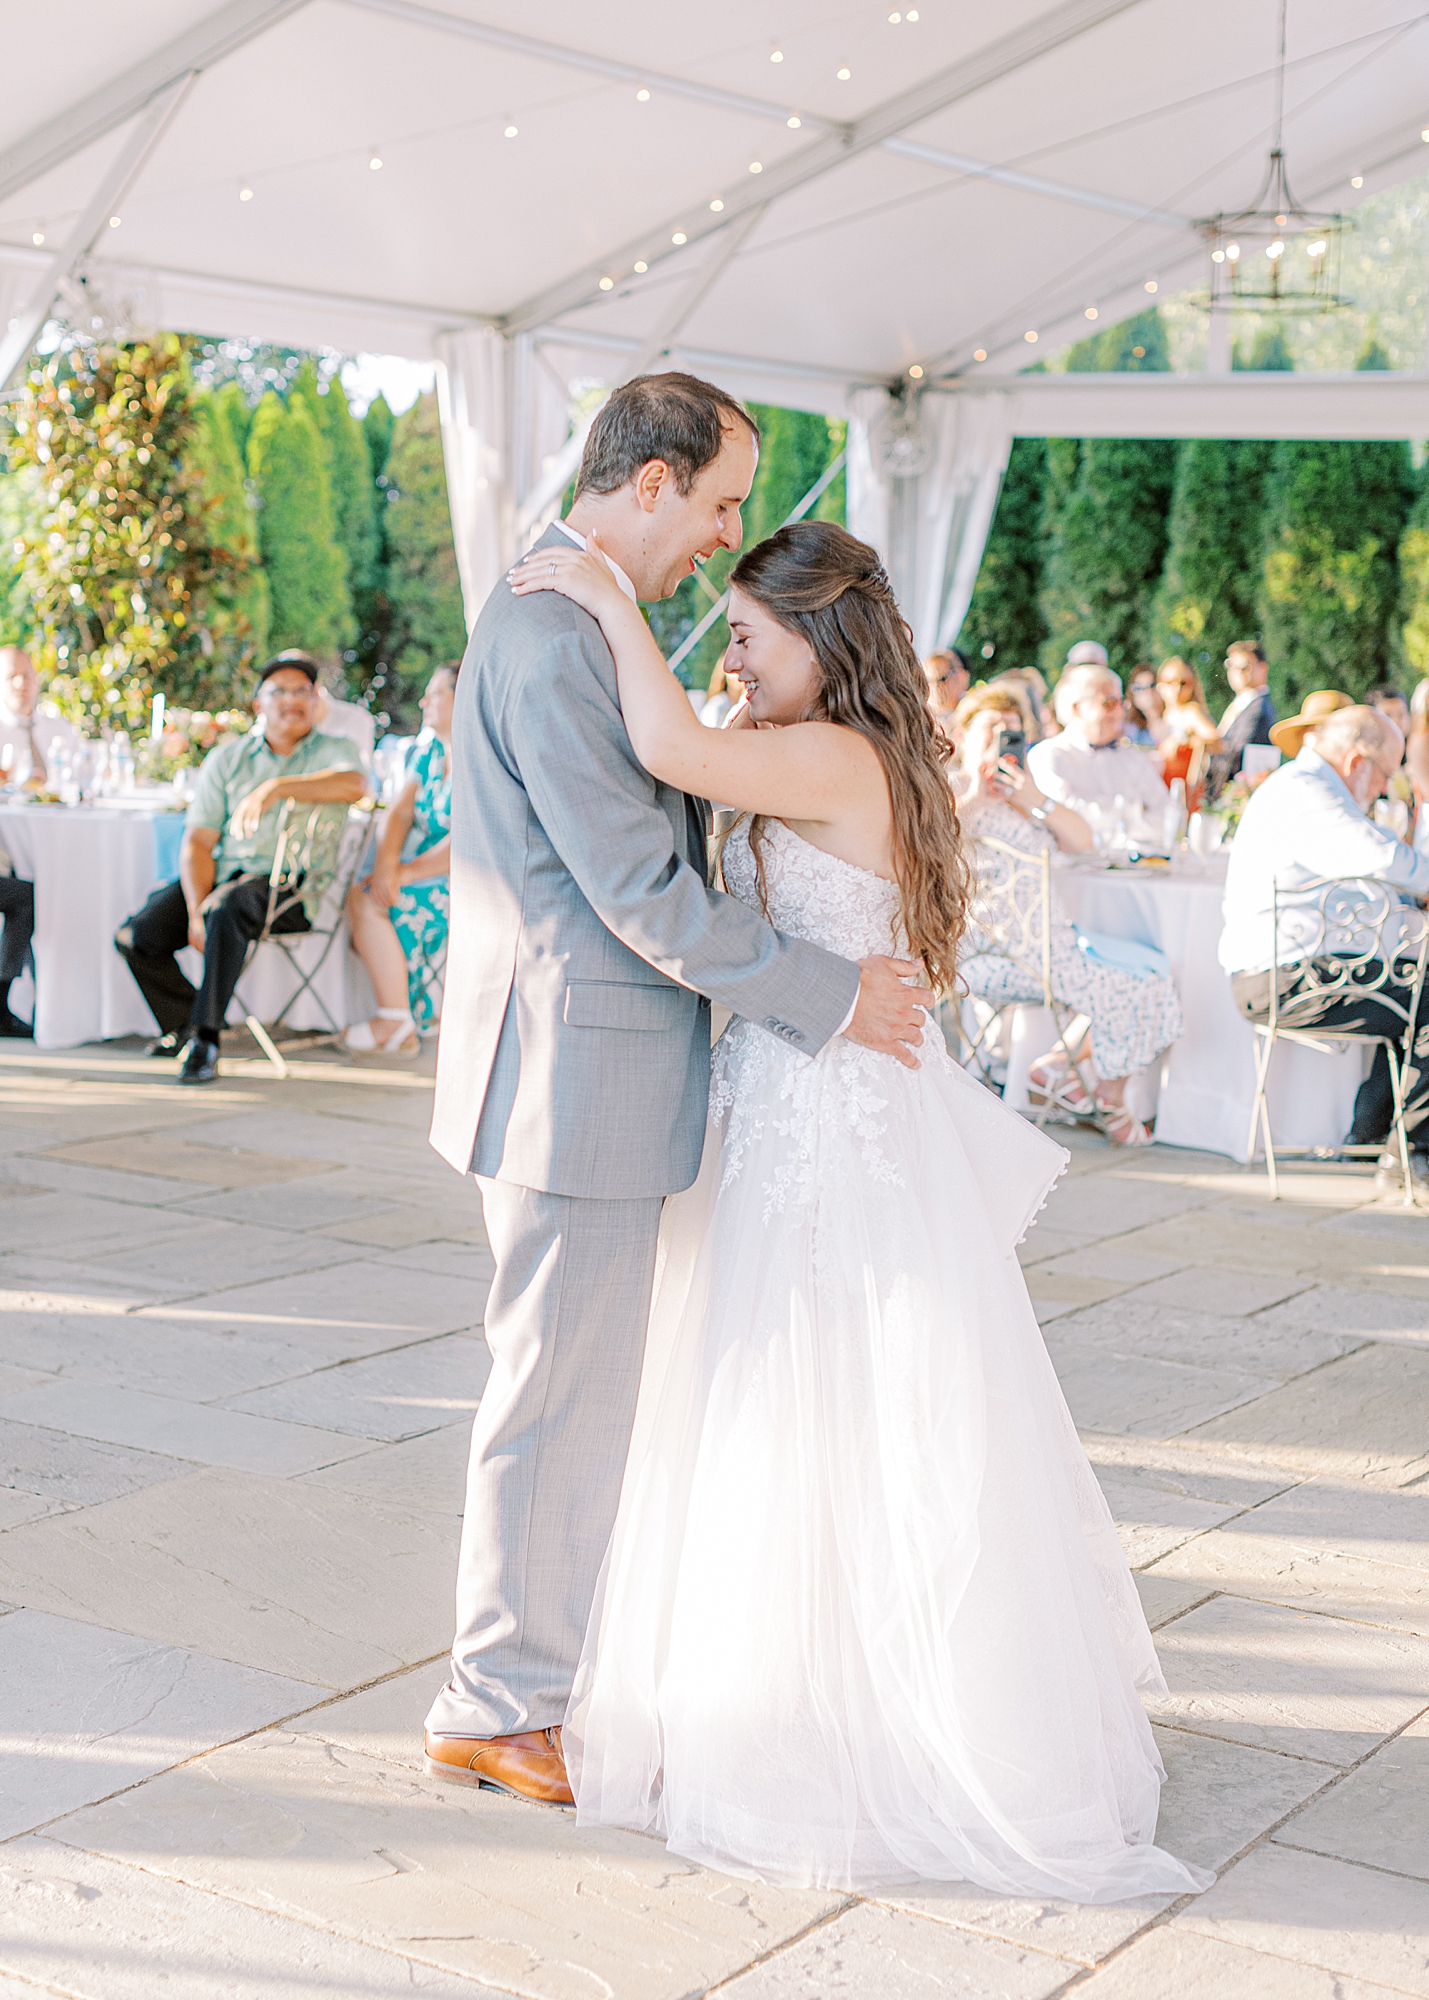 First dance between bride and groom in open aired luxury tent surrounded by hedges.